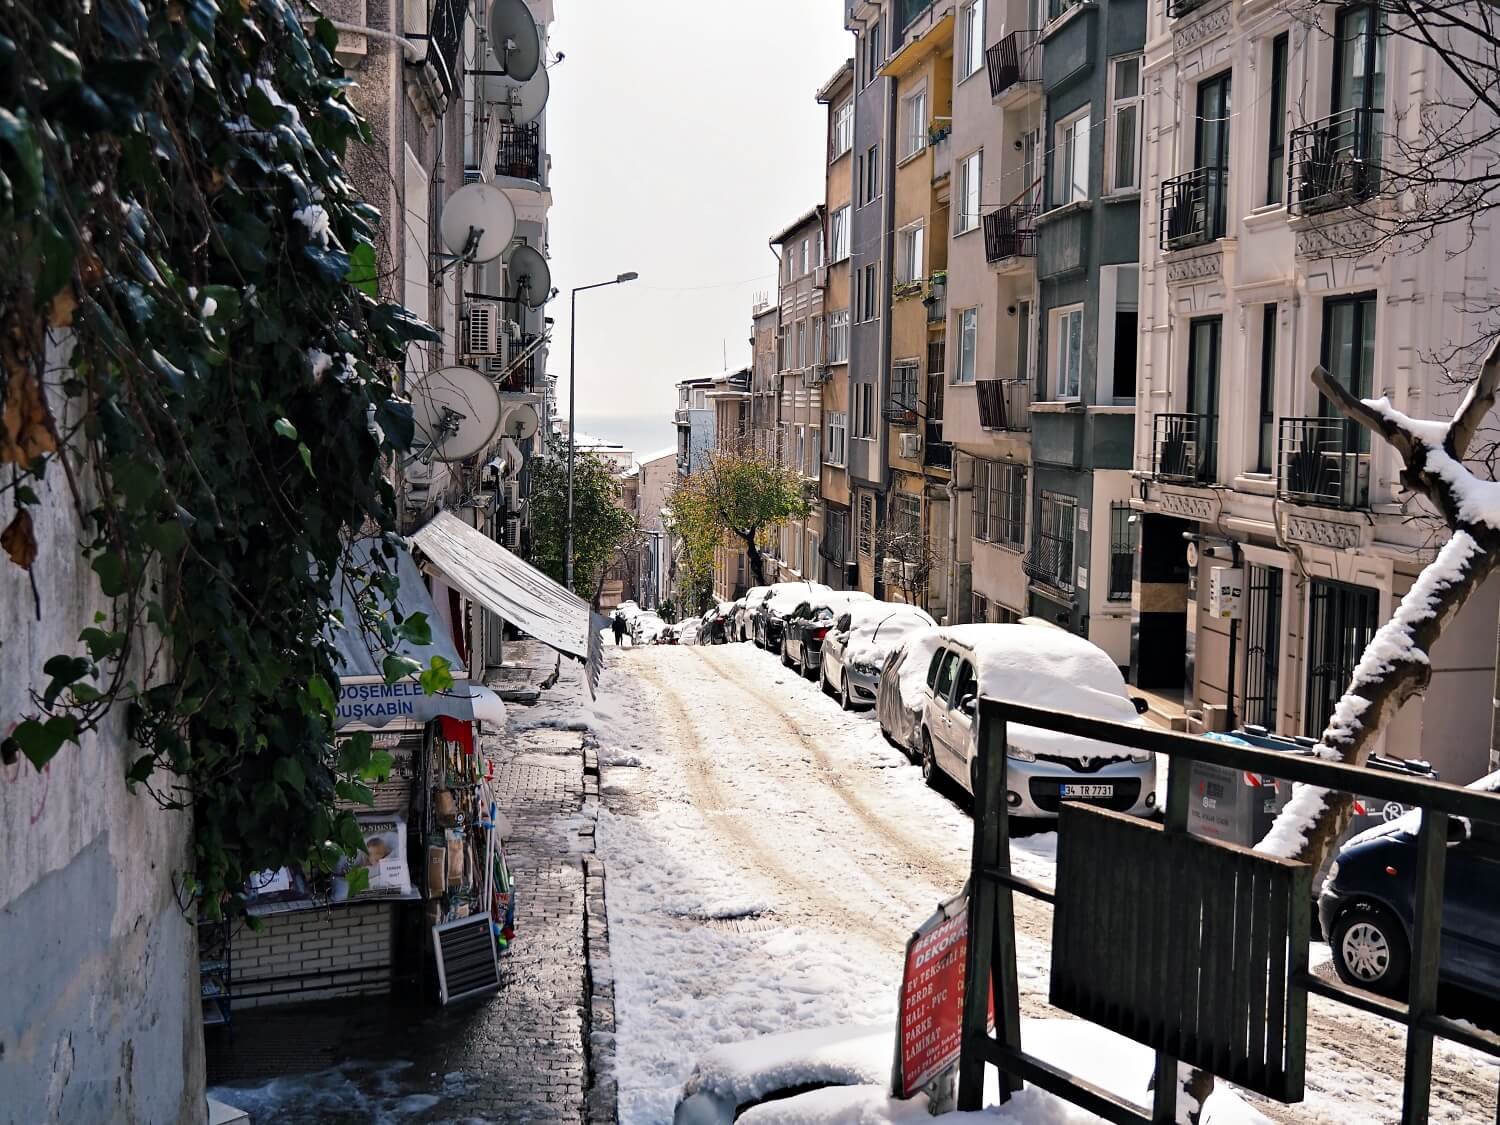 A snowy street in Istanbul in February during winter